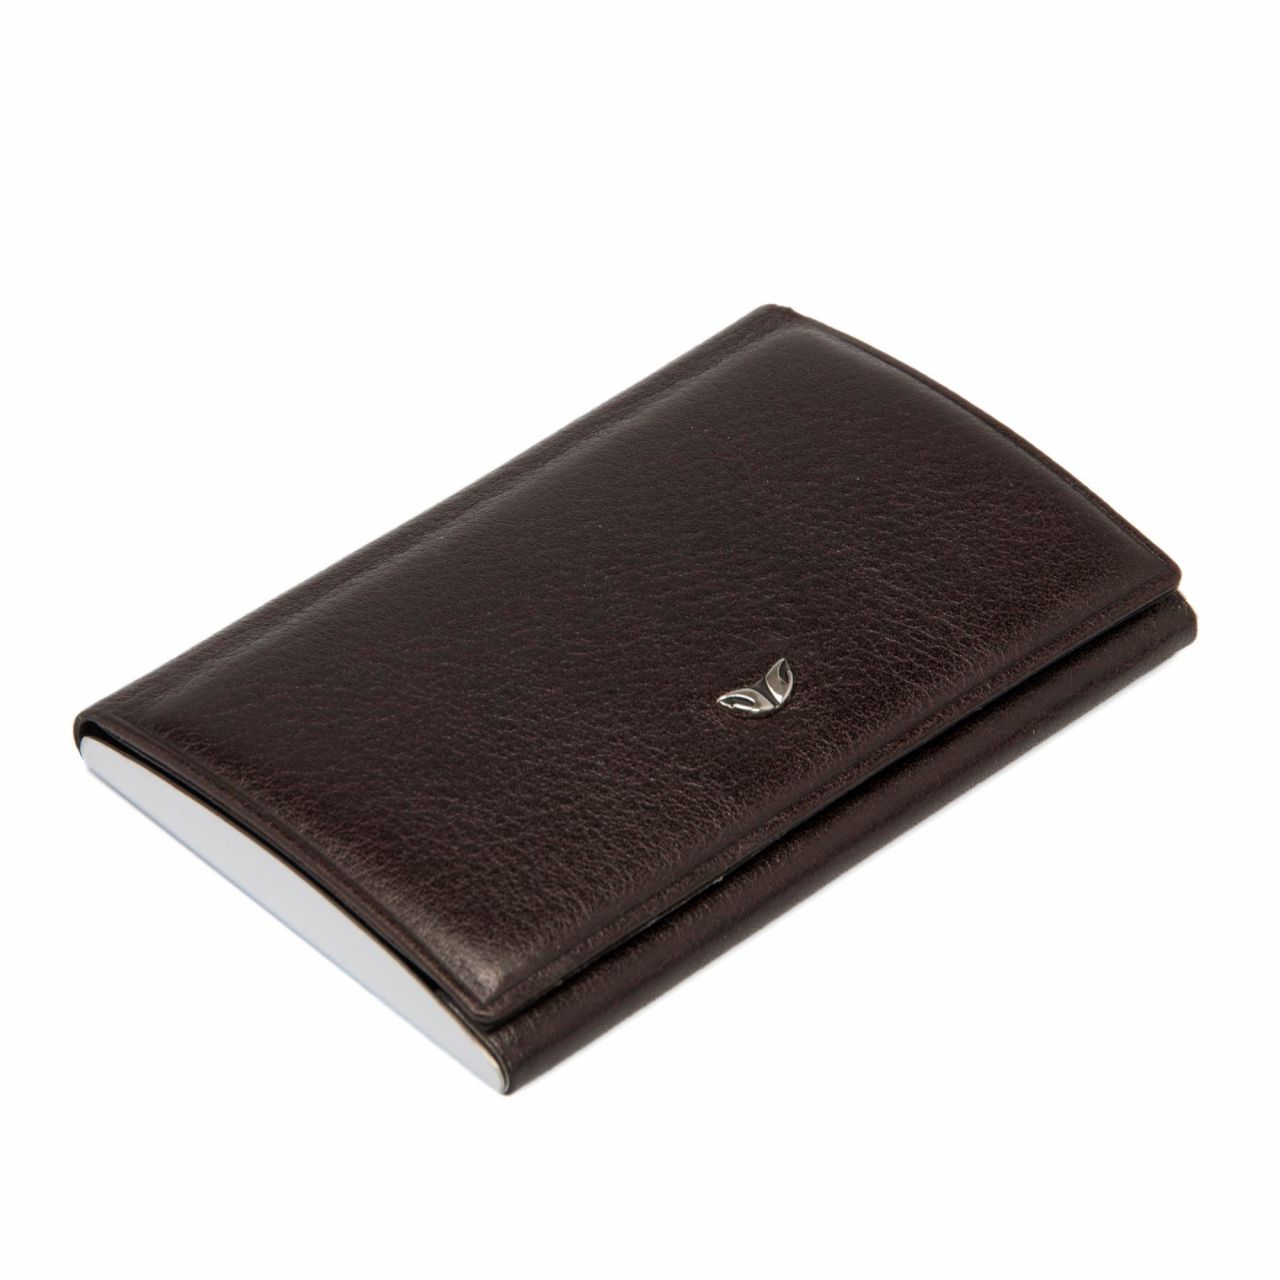 Business Cards Holder from Genuine Leather and Metal